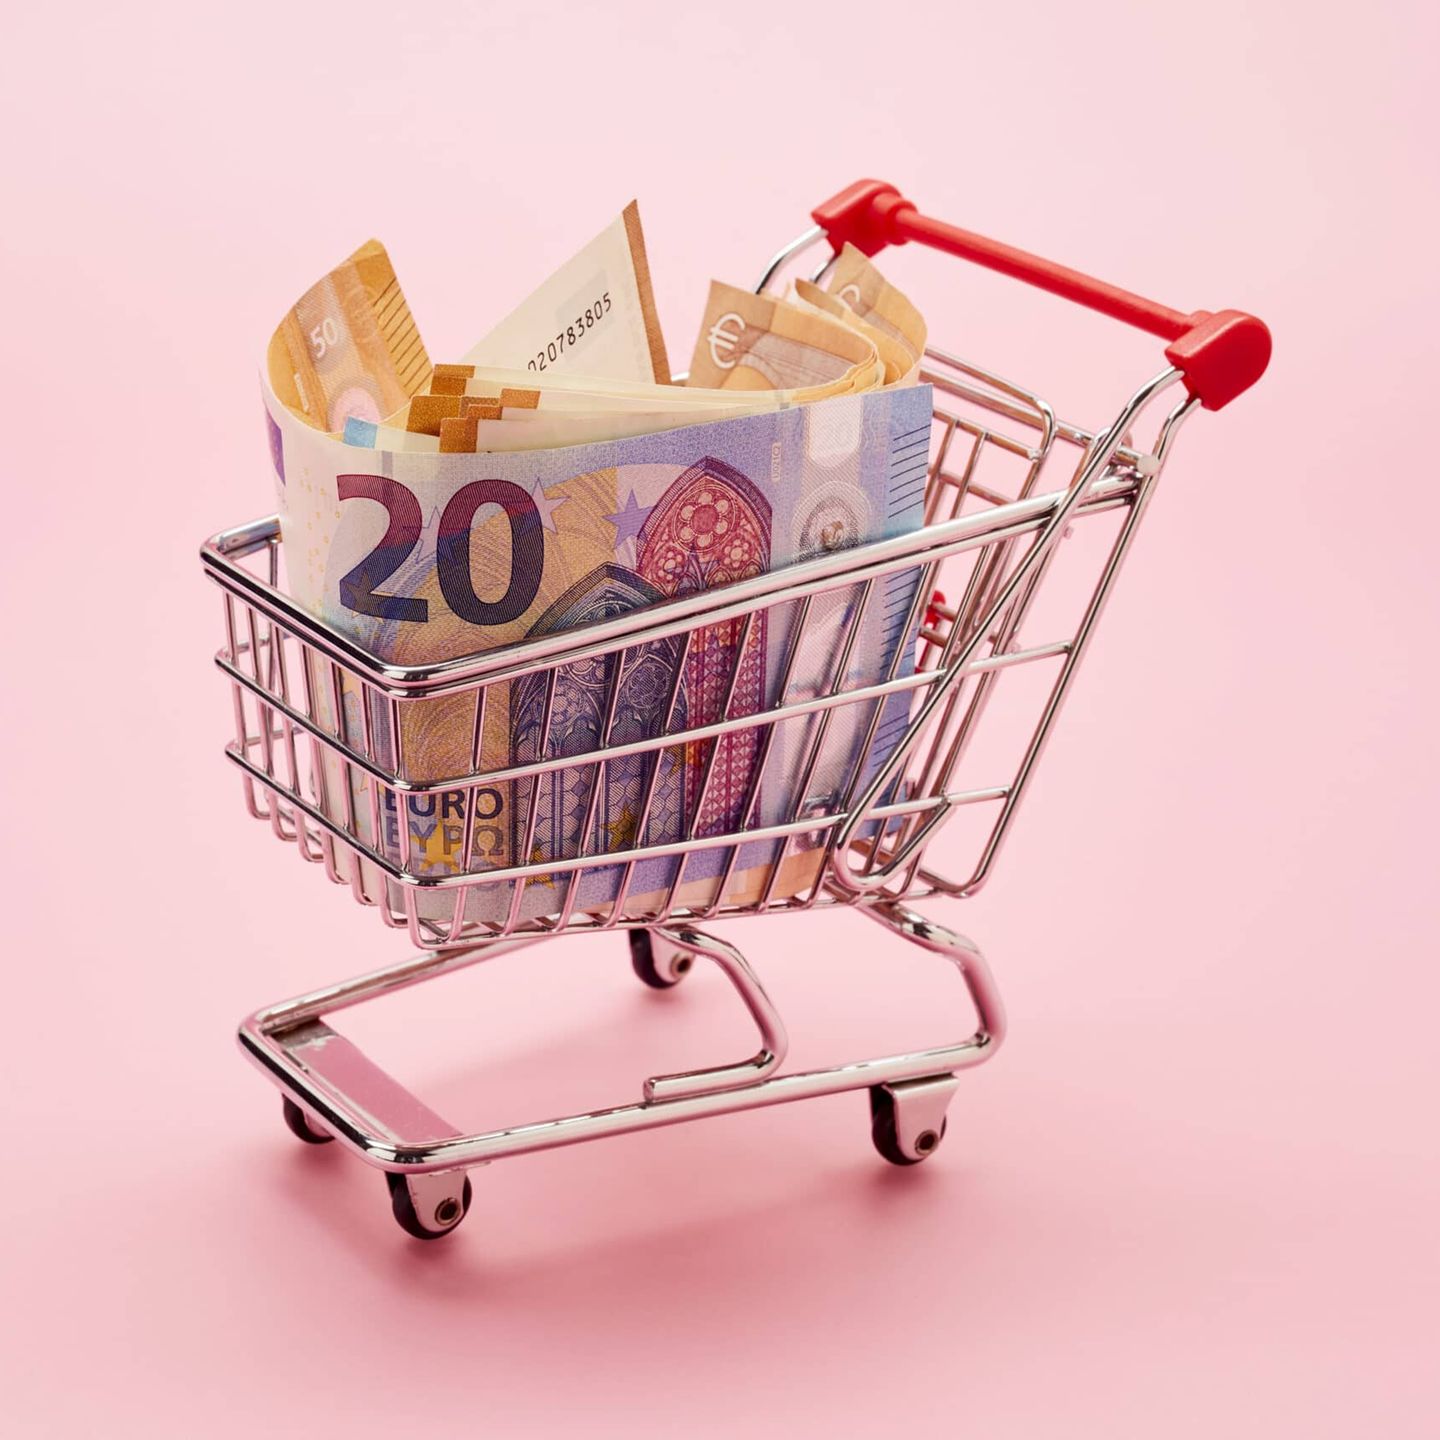 https://image.capital.de/30886396/t/9a/v4/w1440/r1/-/still-life-of-shopping-cart-and-euro-notes-on-pink-background.jpg